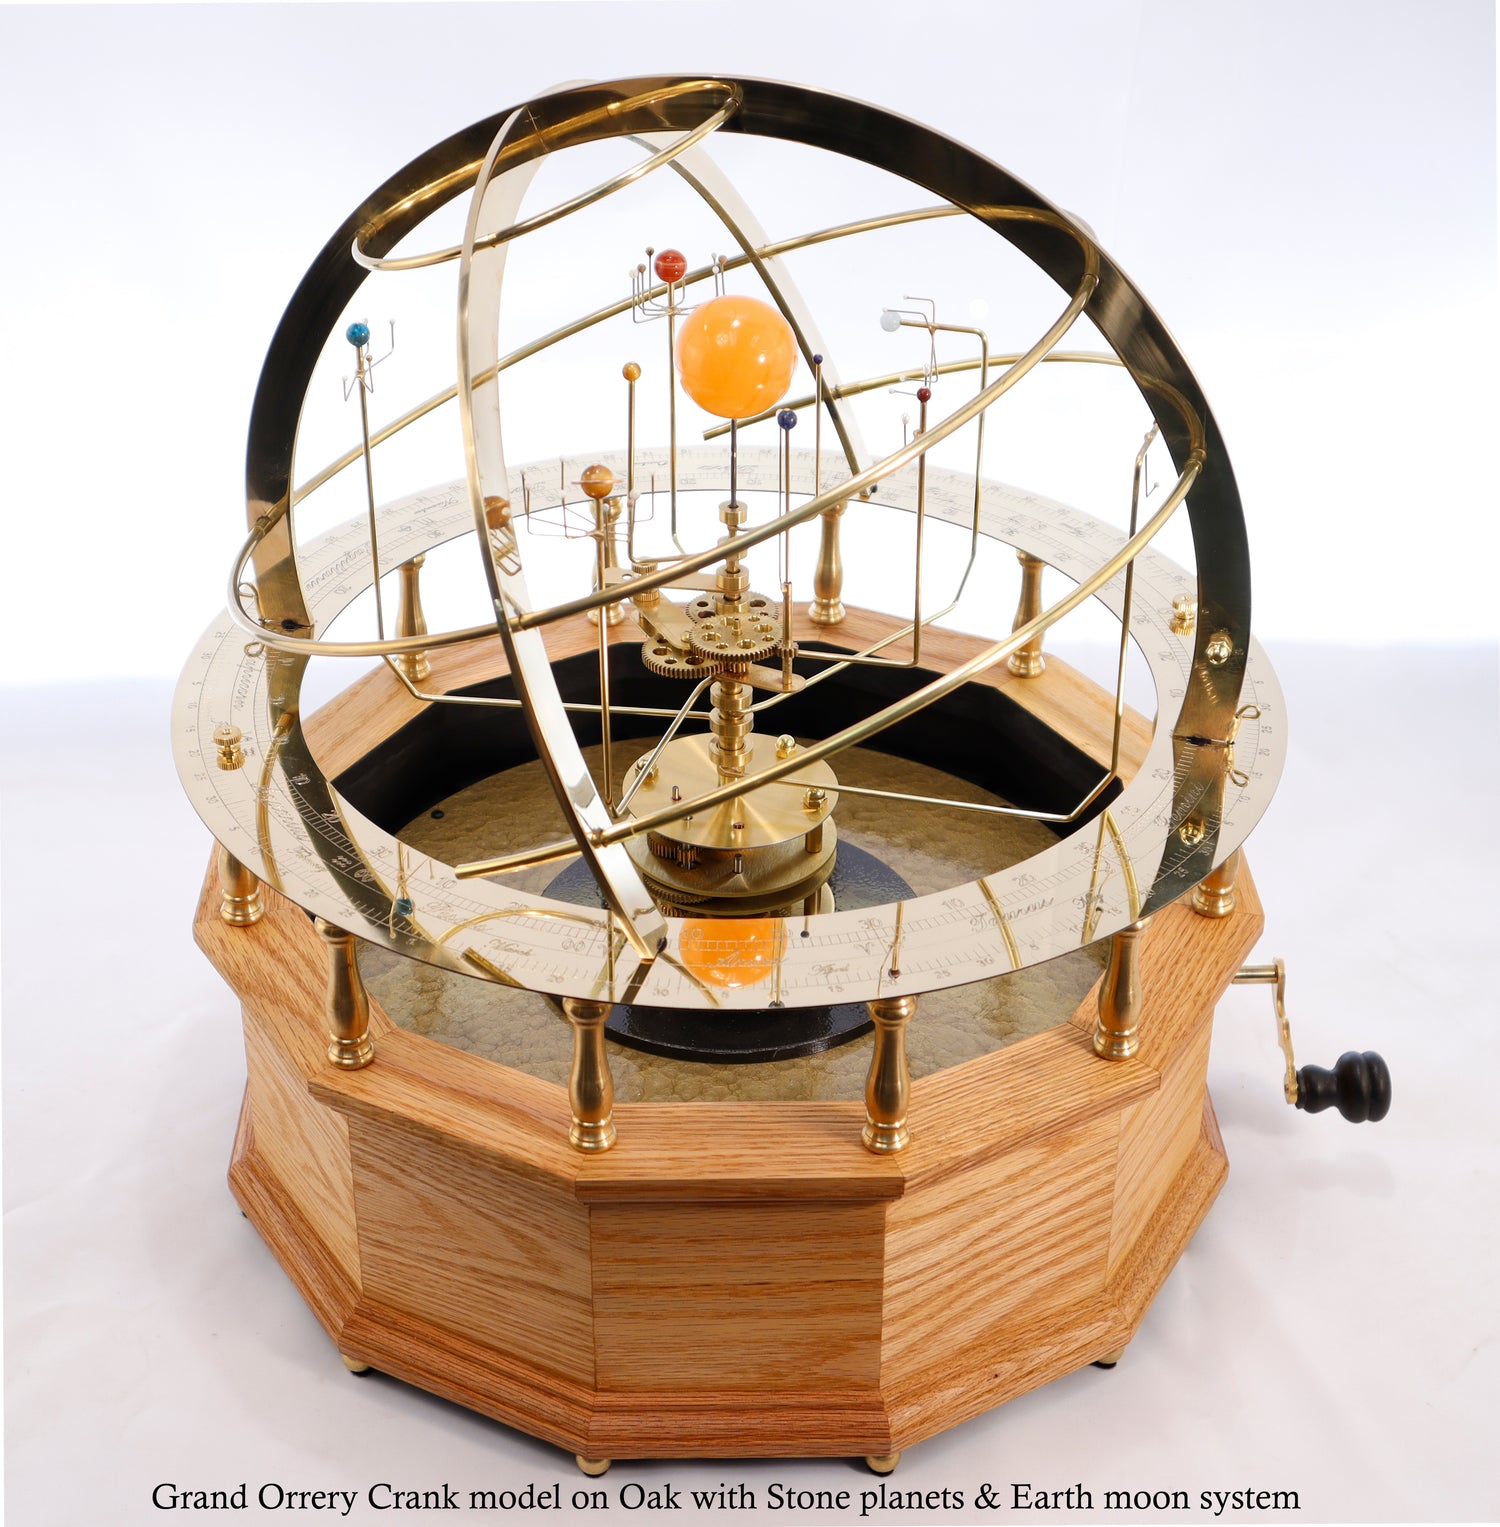 Grand Orrery in natural oak with hand crank